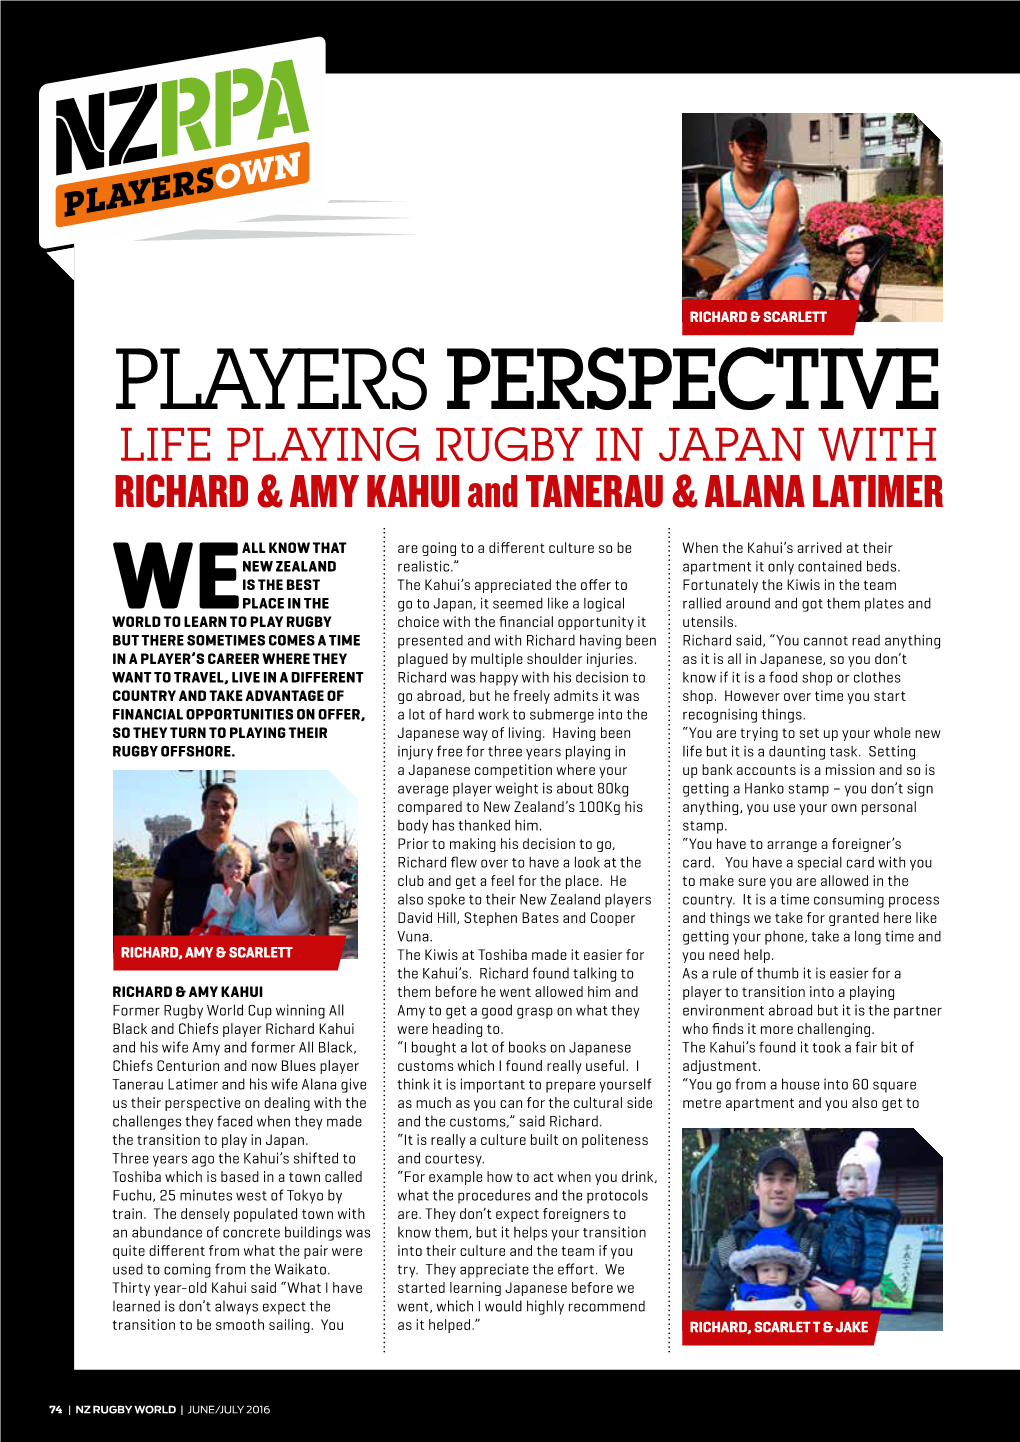 PLAYERS PERSPECTIVE LIFE PLAYING RUGBY in JAPAN with RICHARD & AMY KAHUI and TANERAU & ALANA LATIMER